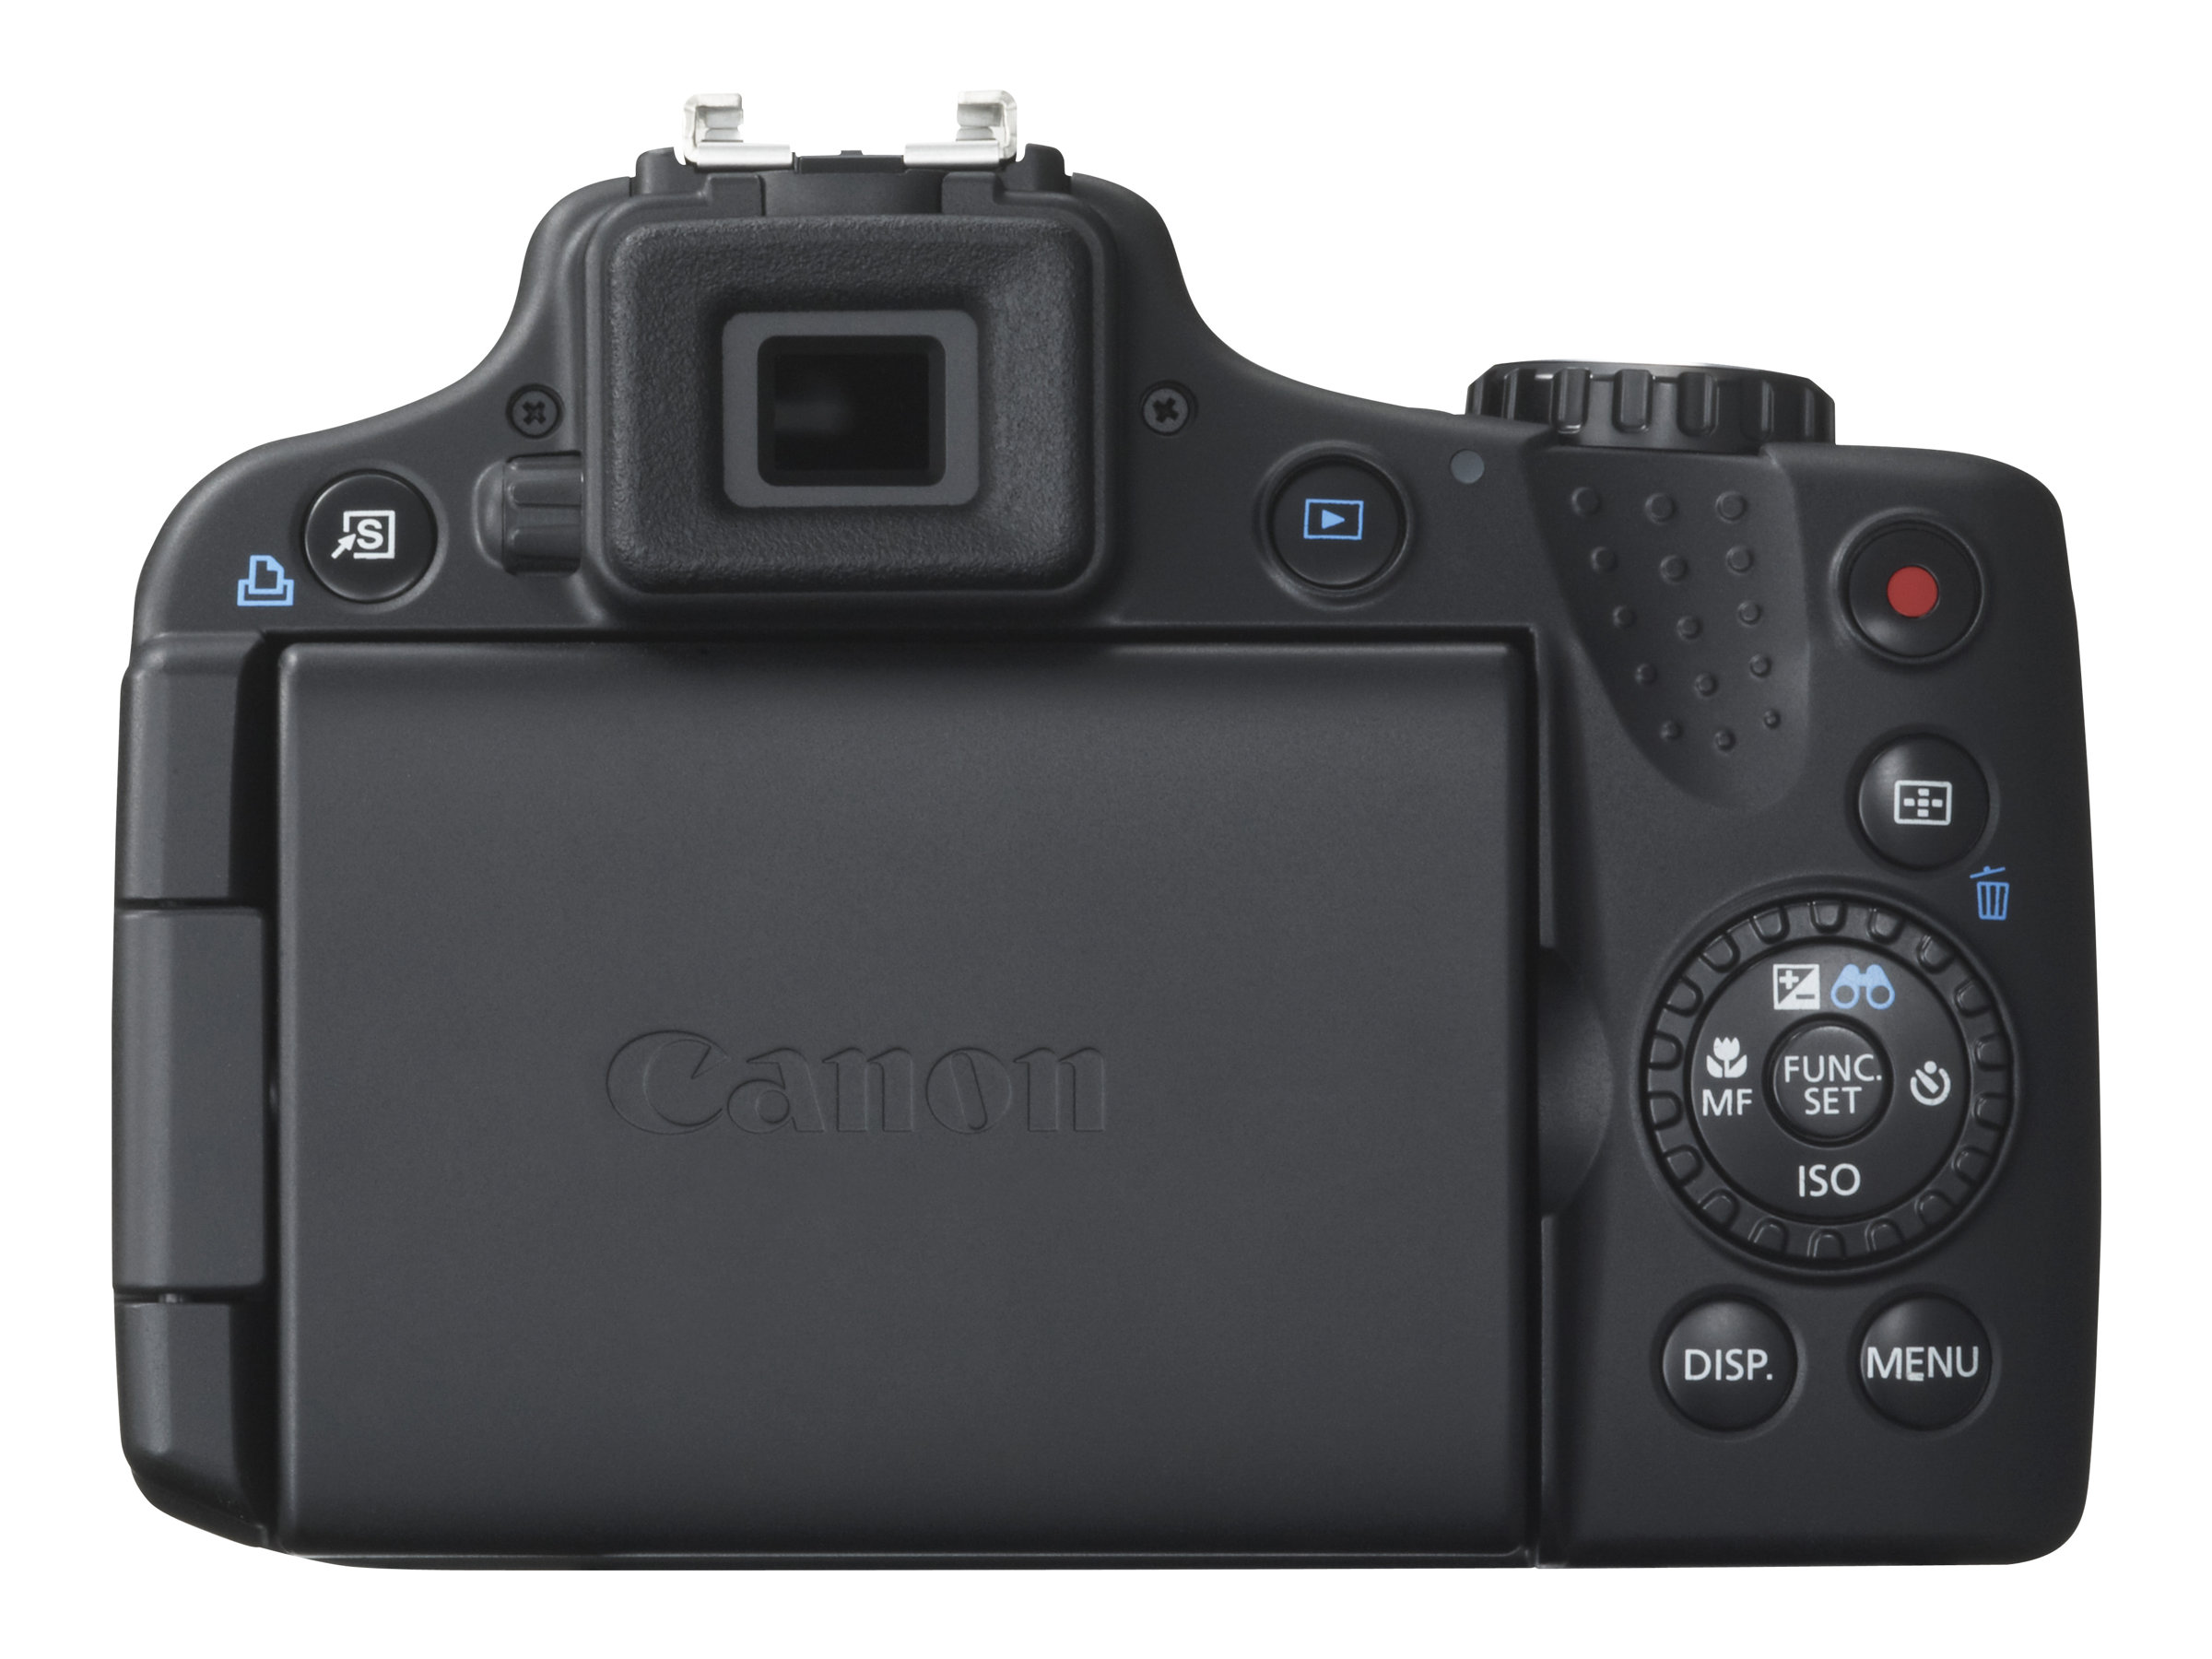 Canon PowerShot SX50 HS - Digital camera - compact - 12.1 MP - 1080p - 50x optical zoom - image 6 of 15